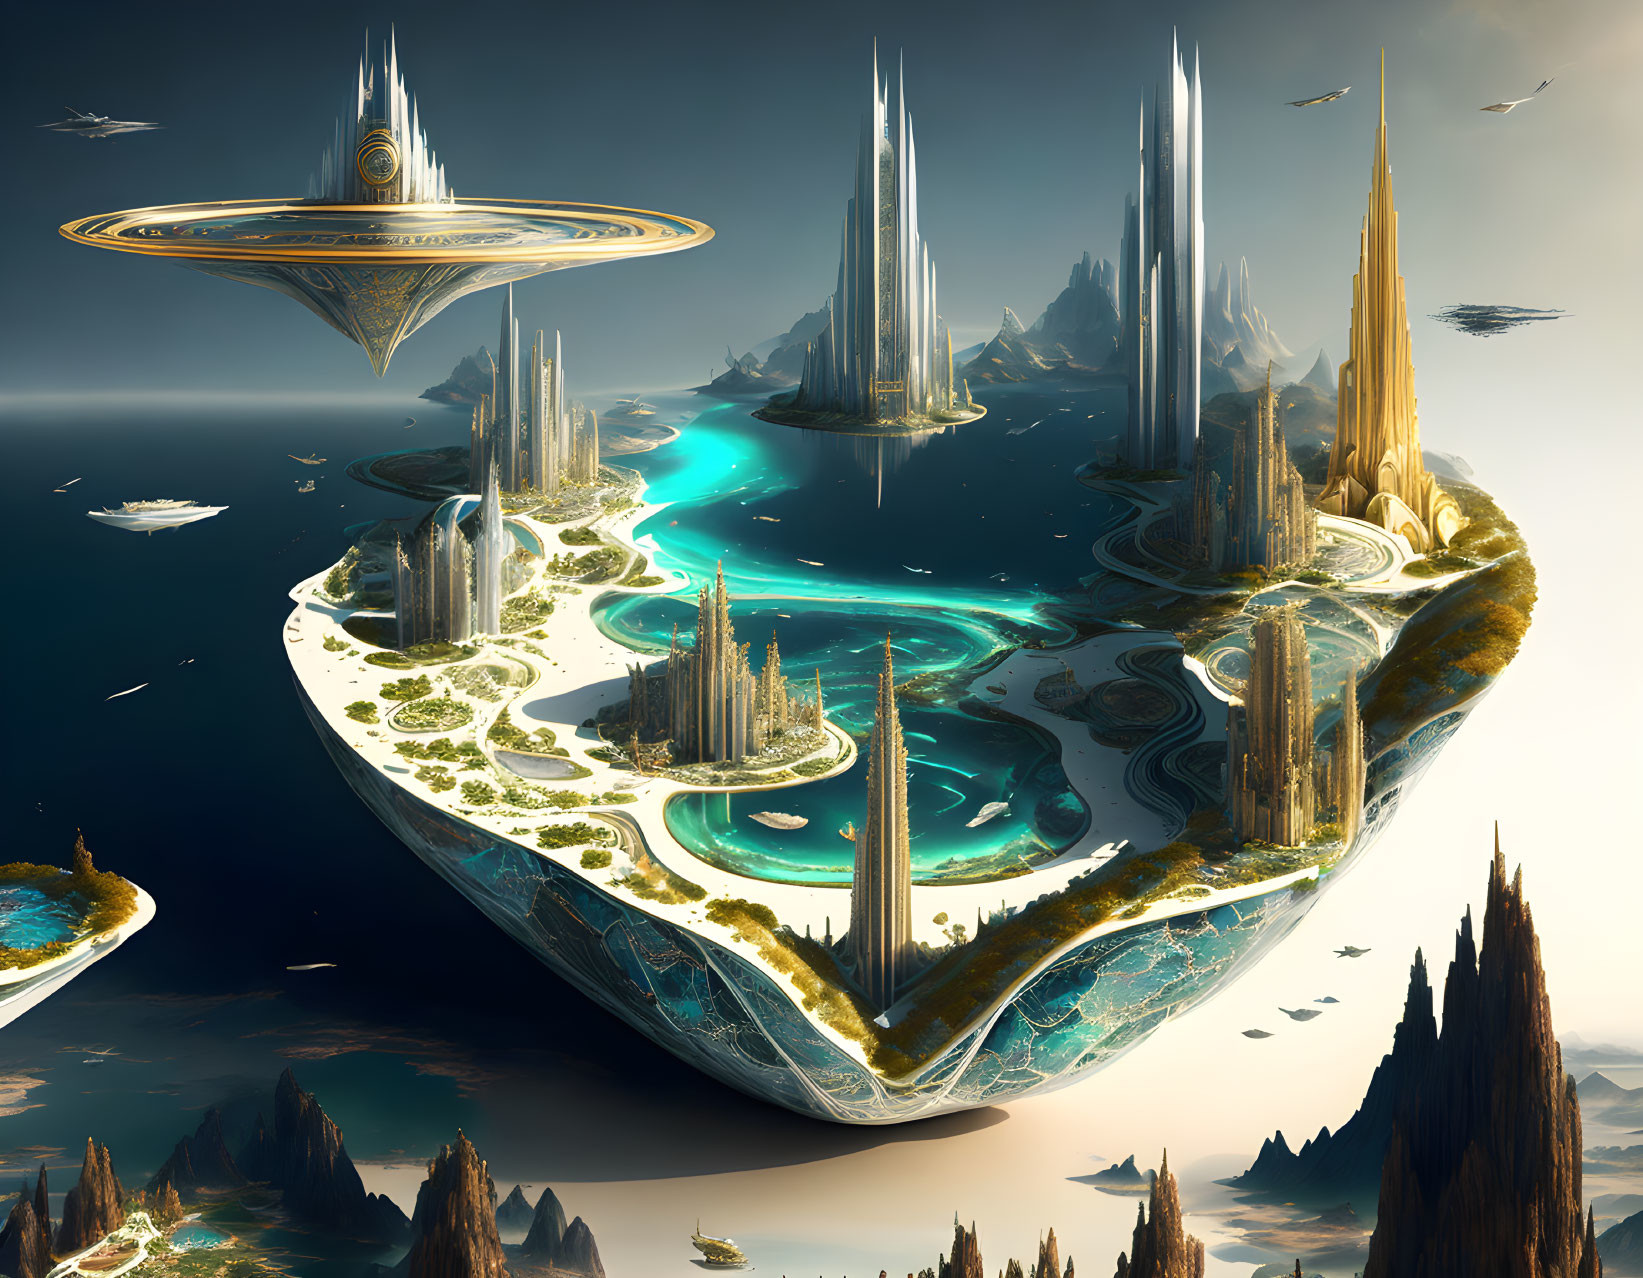 Futuristic city with towering spires on floating island surrounded by water